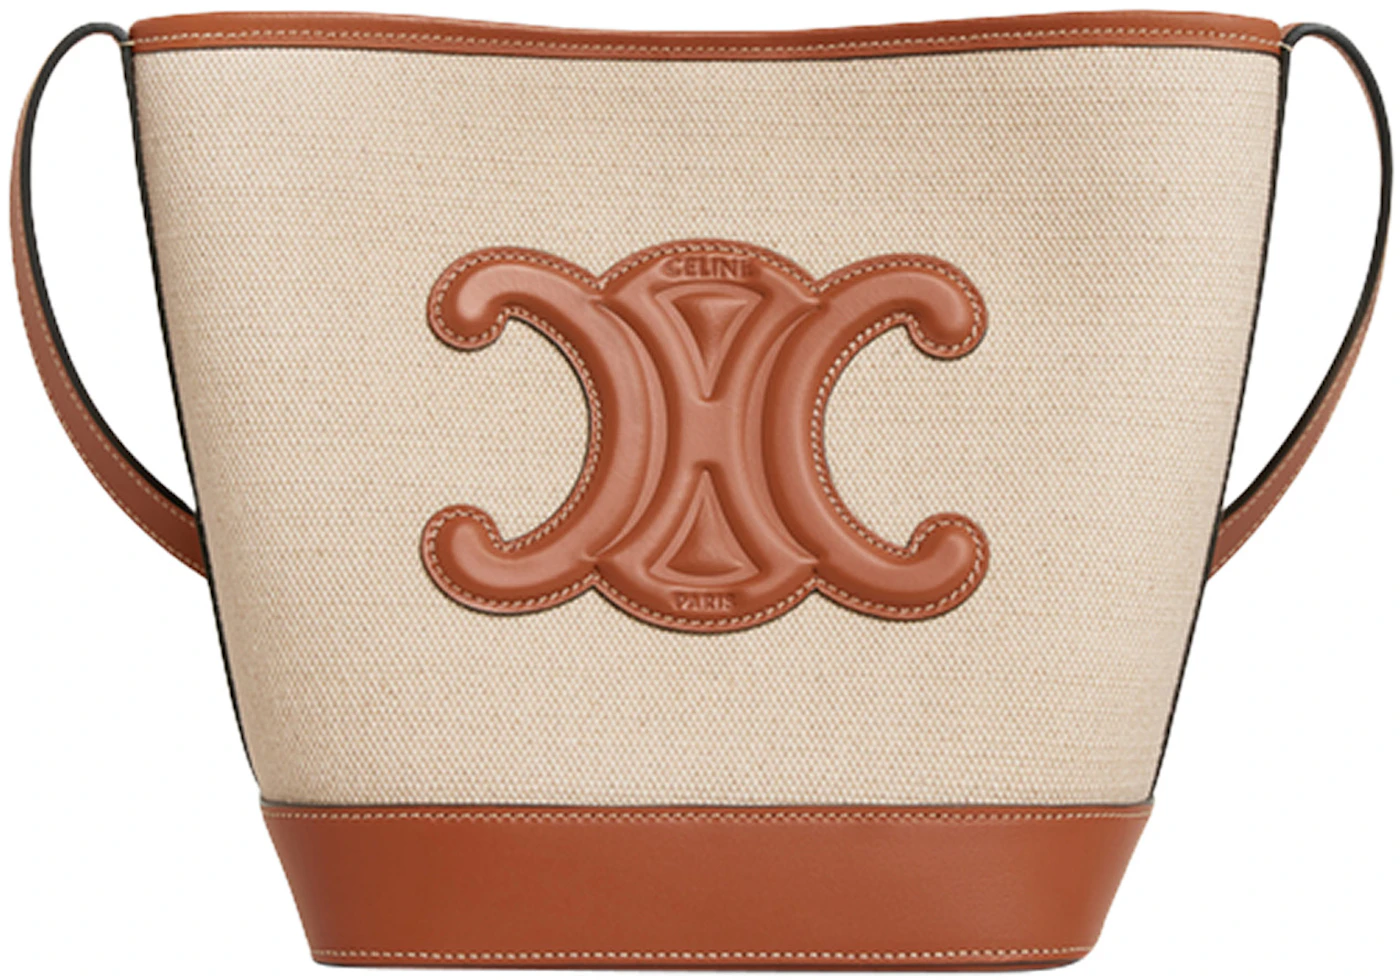 SMALL BOSTON CUIR TRIOMPHE IN STRIPED TEXTILE AND CALFSKIN - BEIGE